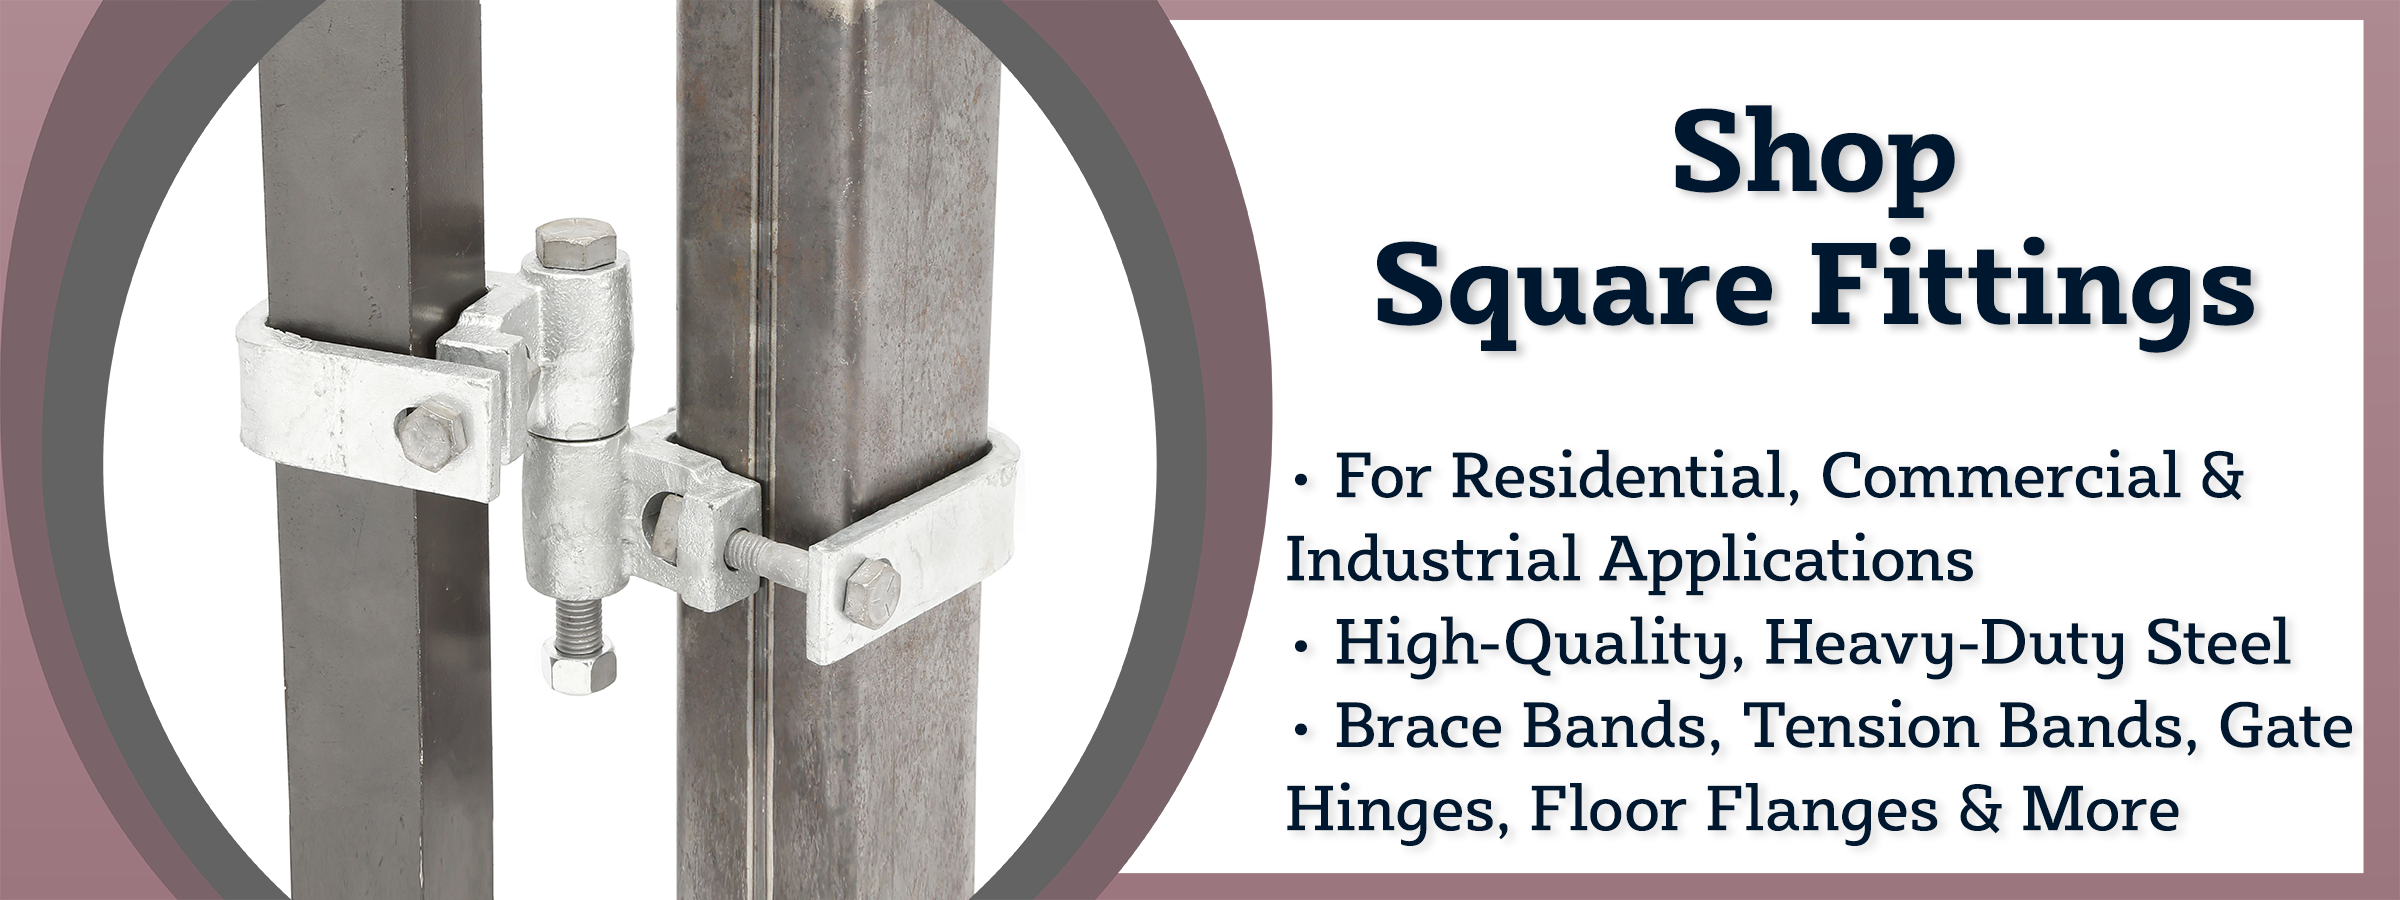 Quality Square Fence Fittings